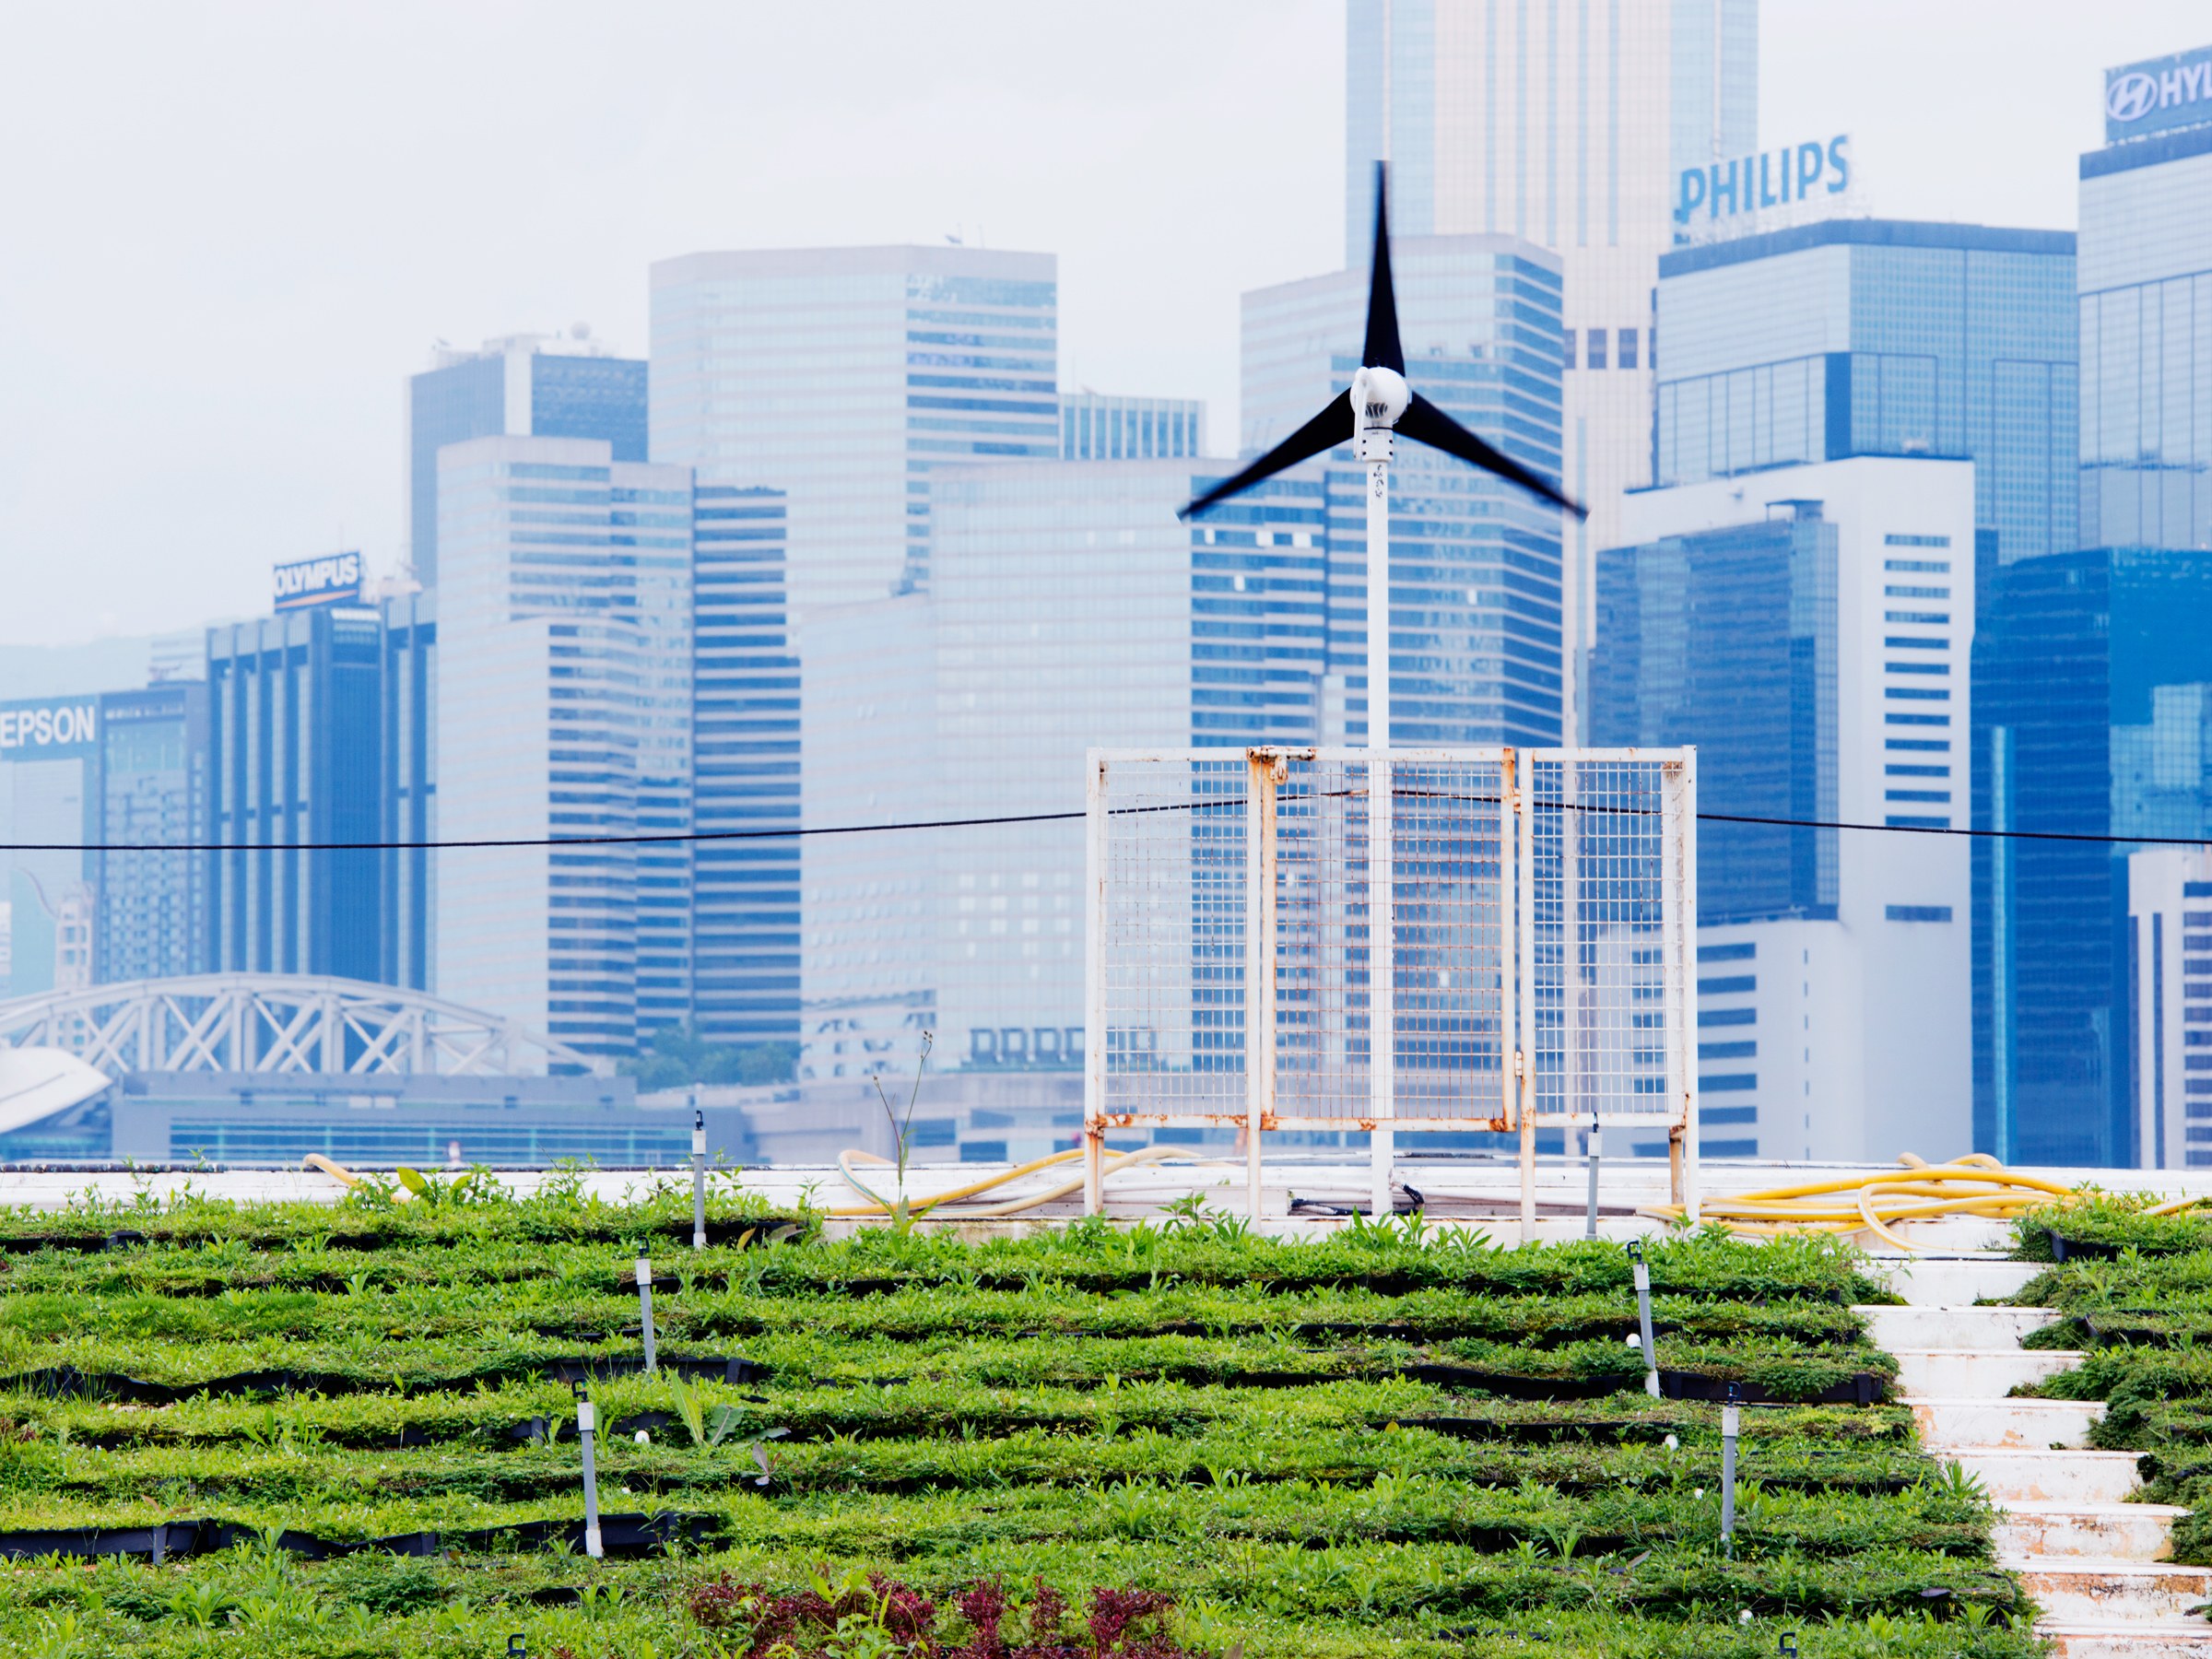 Big Data Suggests Big Potential for Urban Farming | WIRED